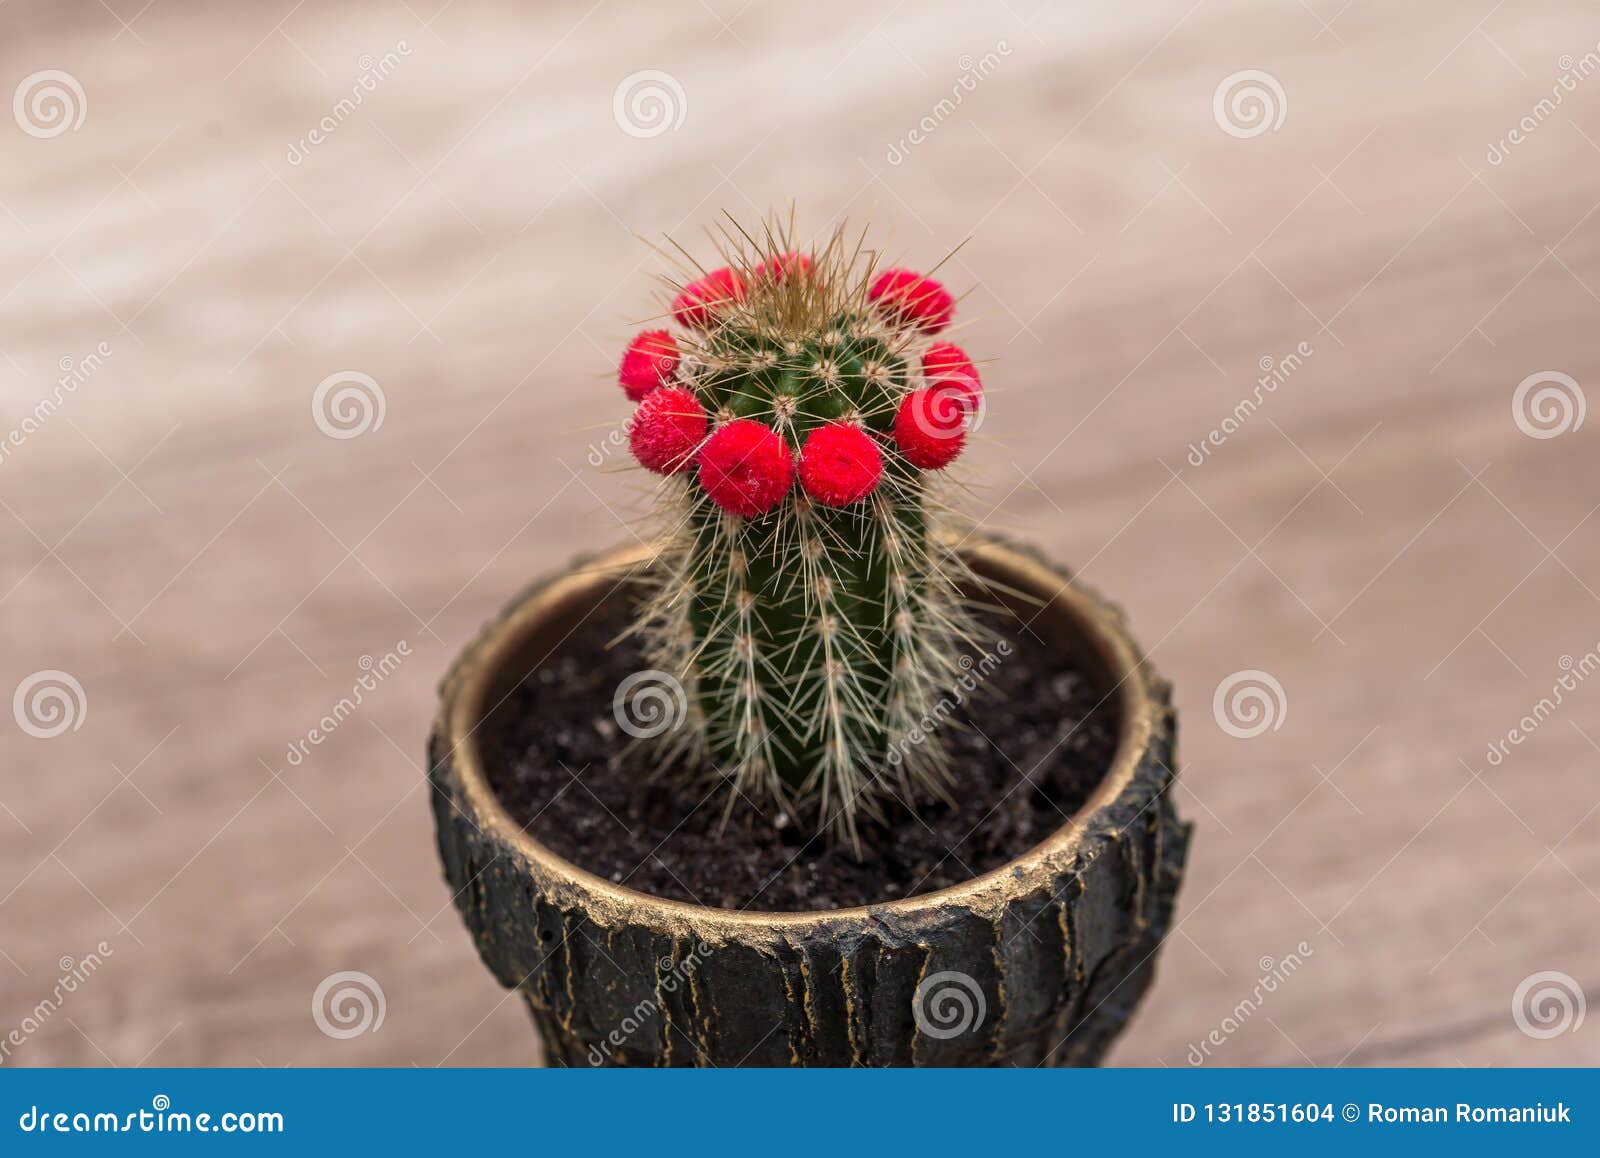 Cactus With A Red Flower On Desk Stock Photo Image Of Flowers